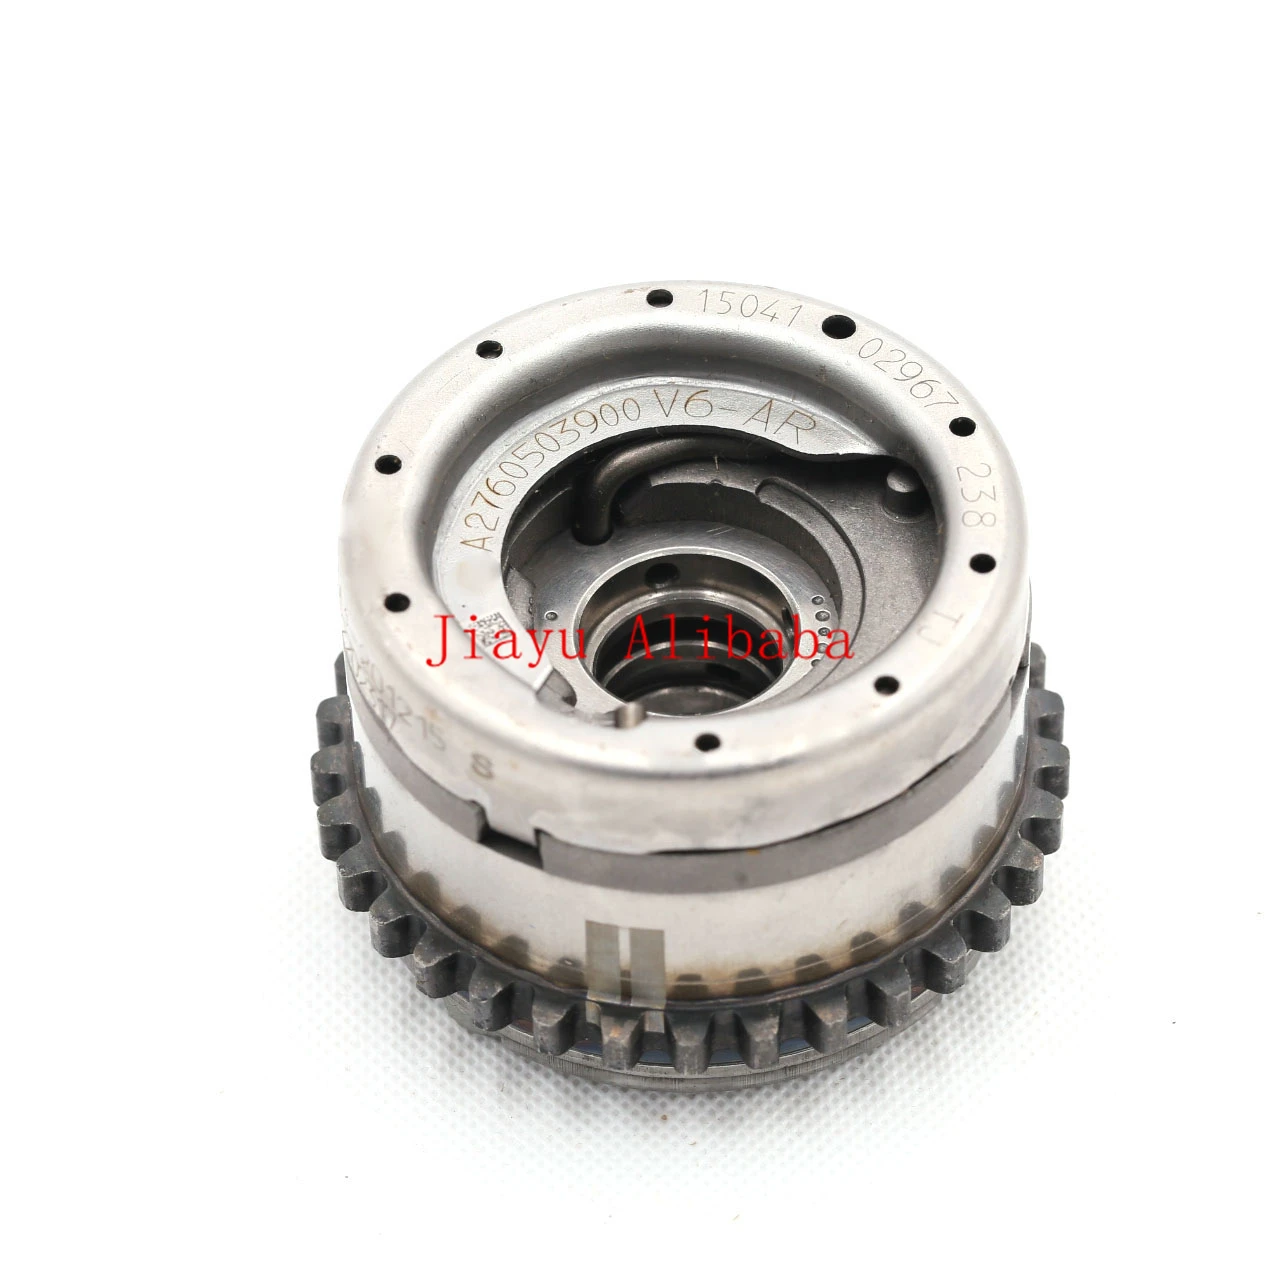 

W222 W166 M276 is Suitable for Mercedes-Benz Engine Exhaust Valve Right Camshaft Adjuster Actuator 2760503900 A2760503900